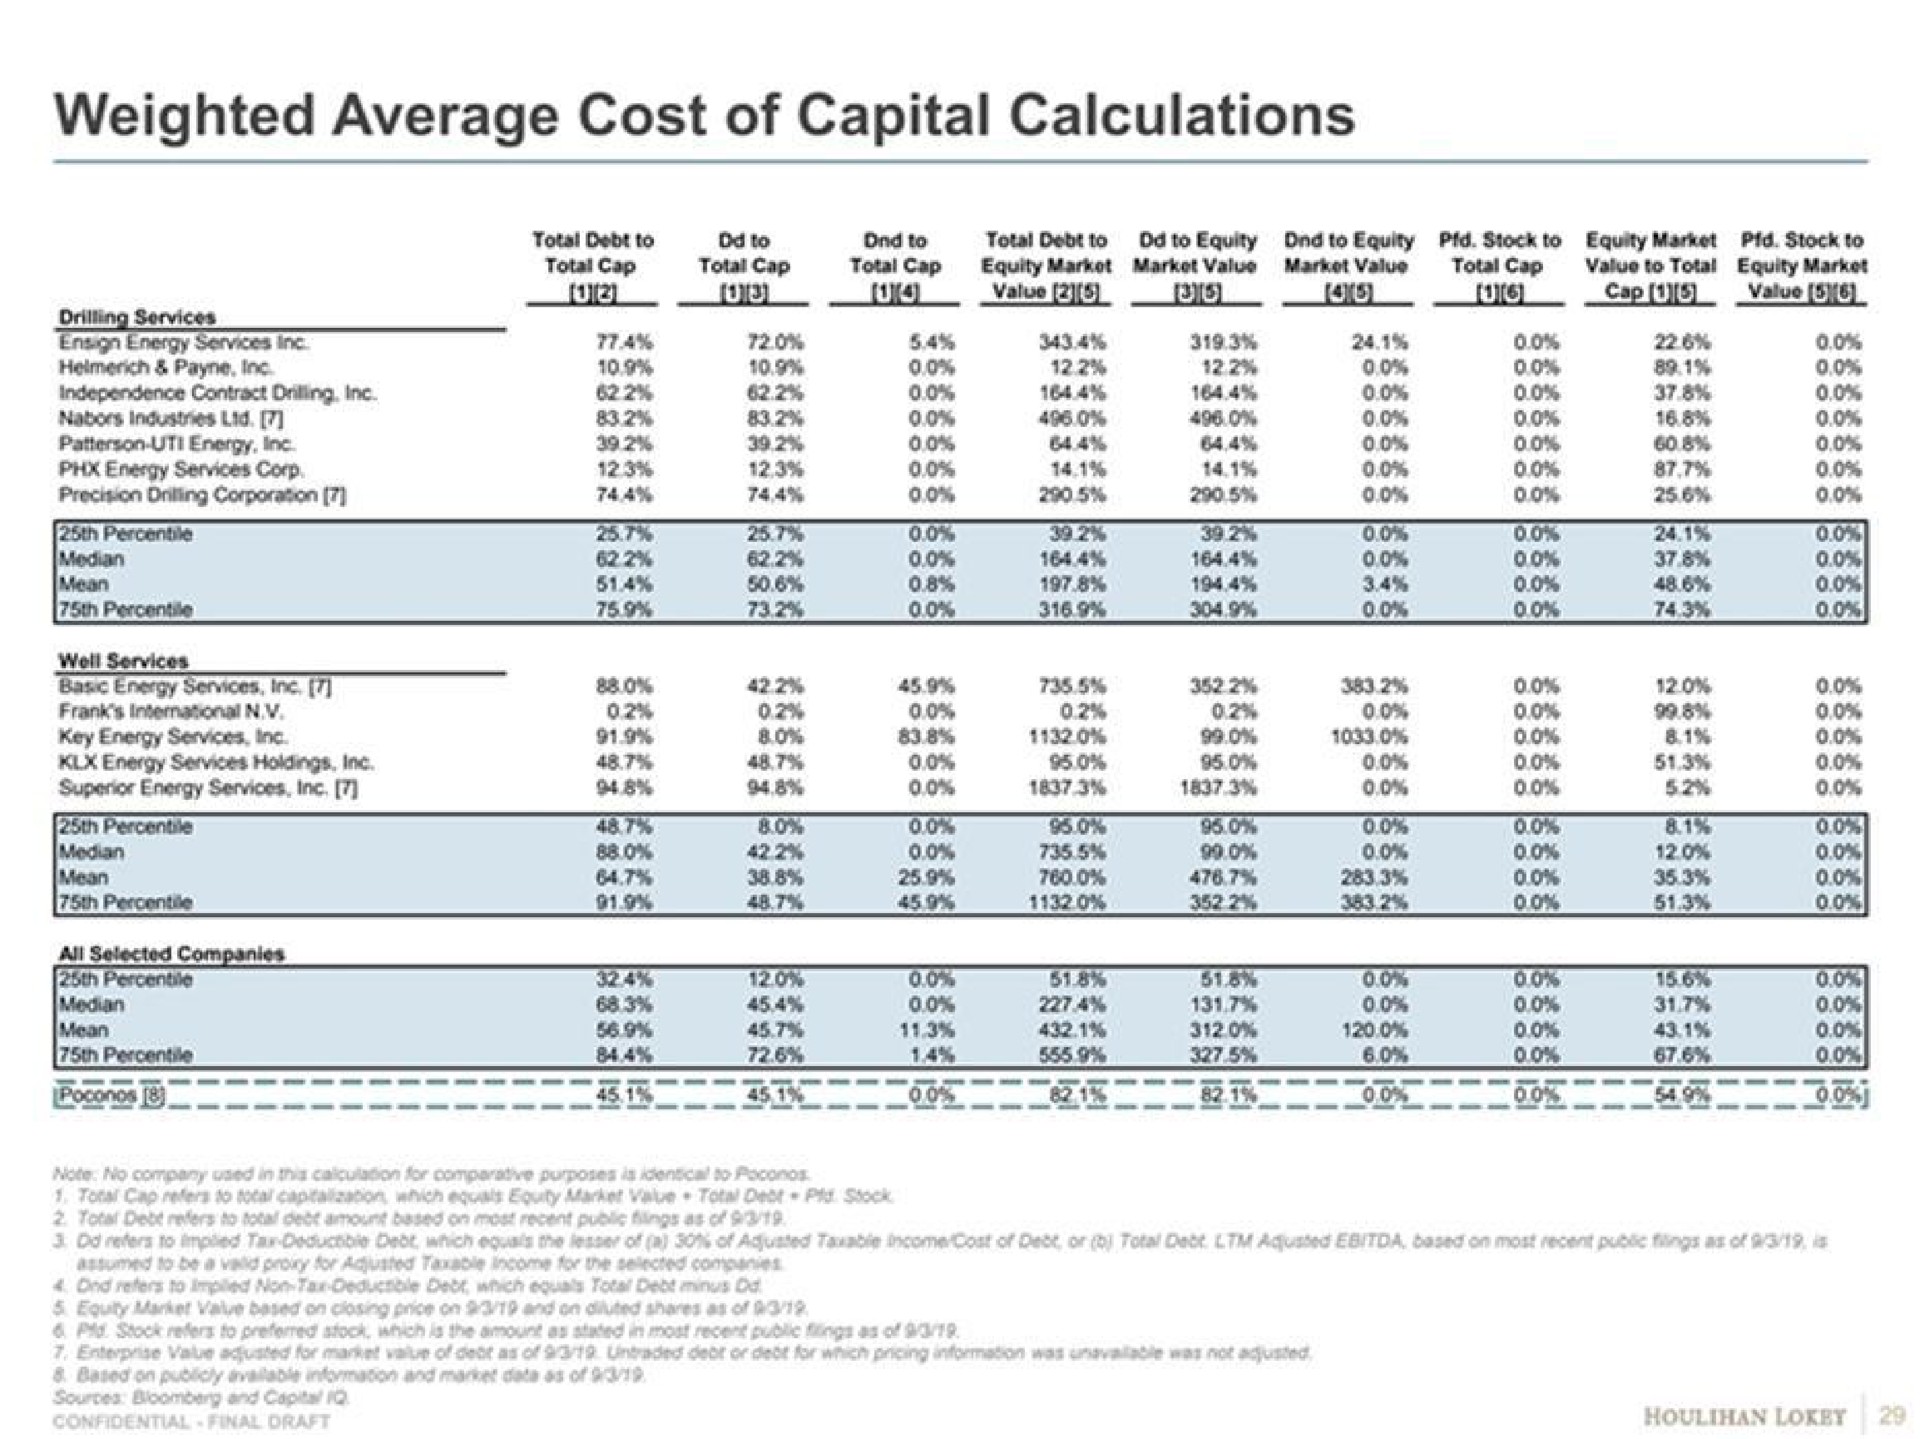 weighted average cost of capital calculations | Goldman Sachs